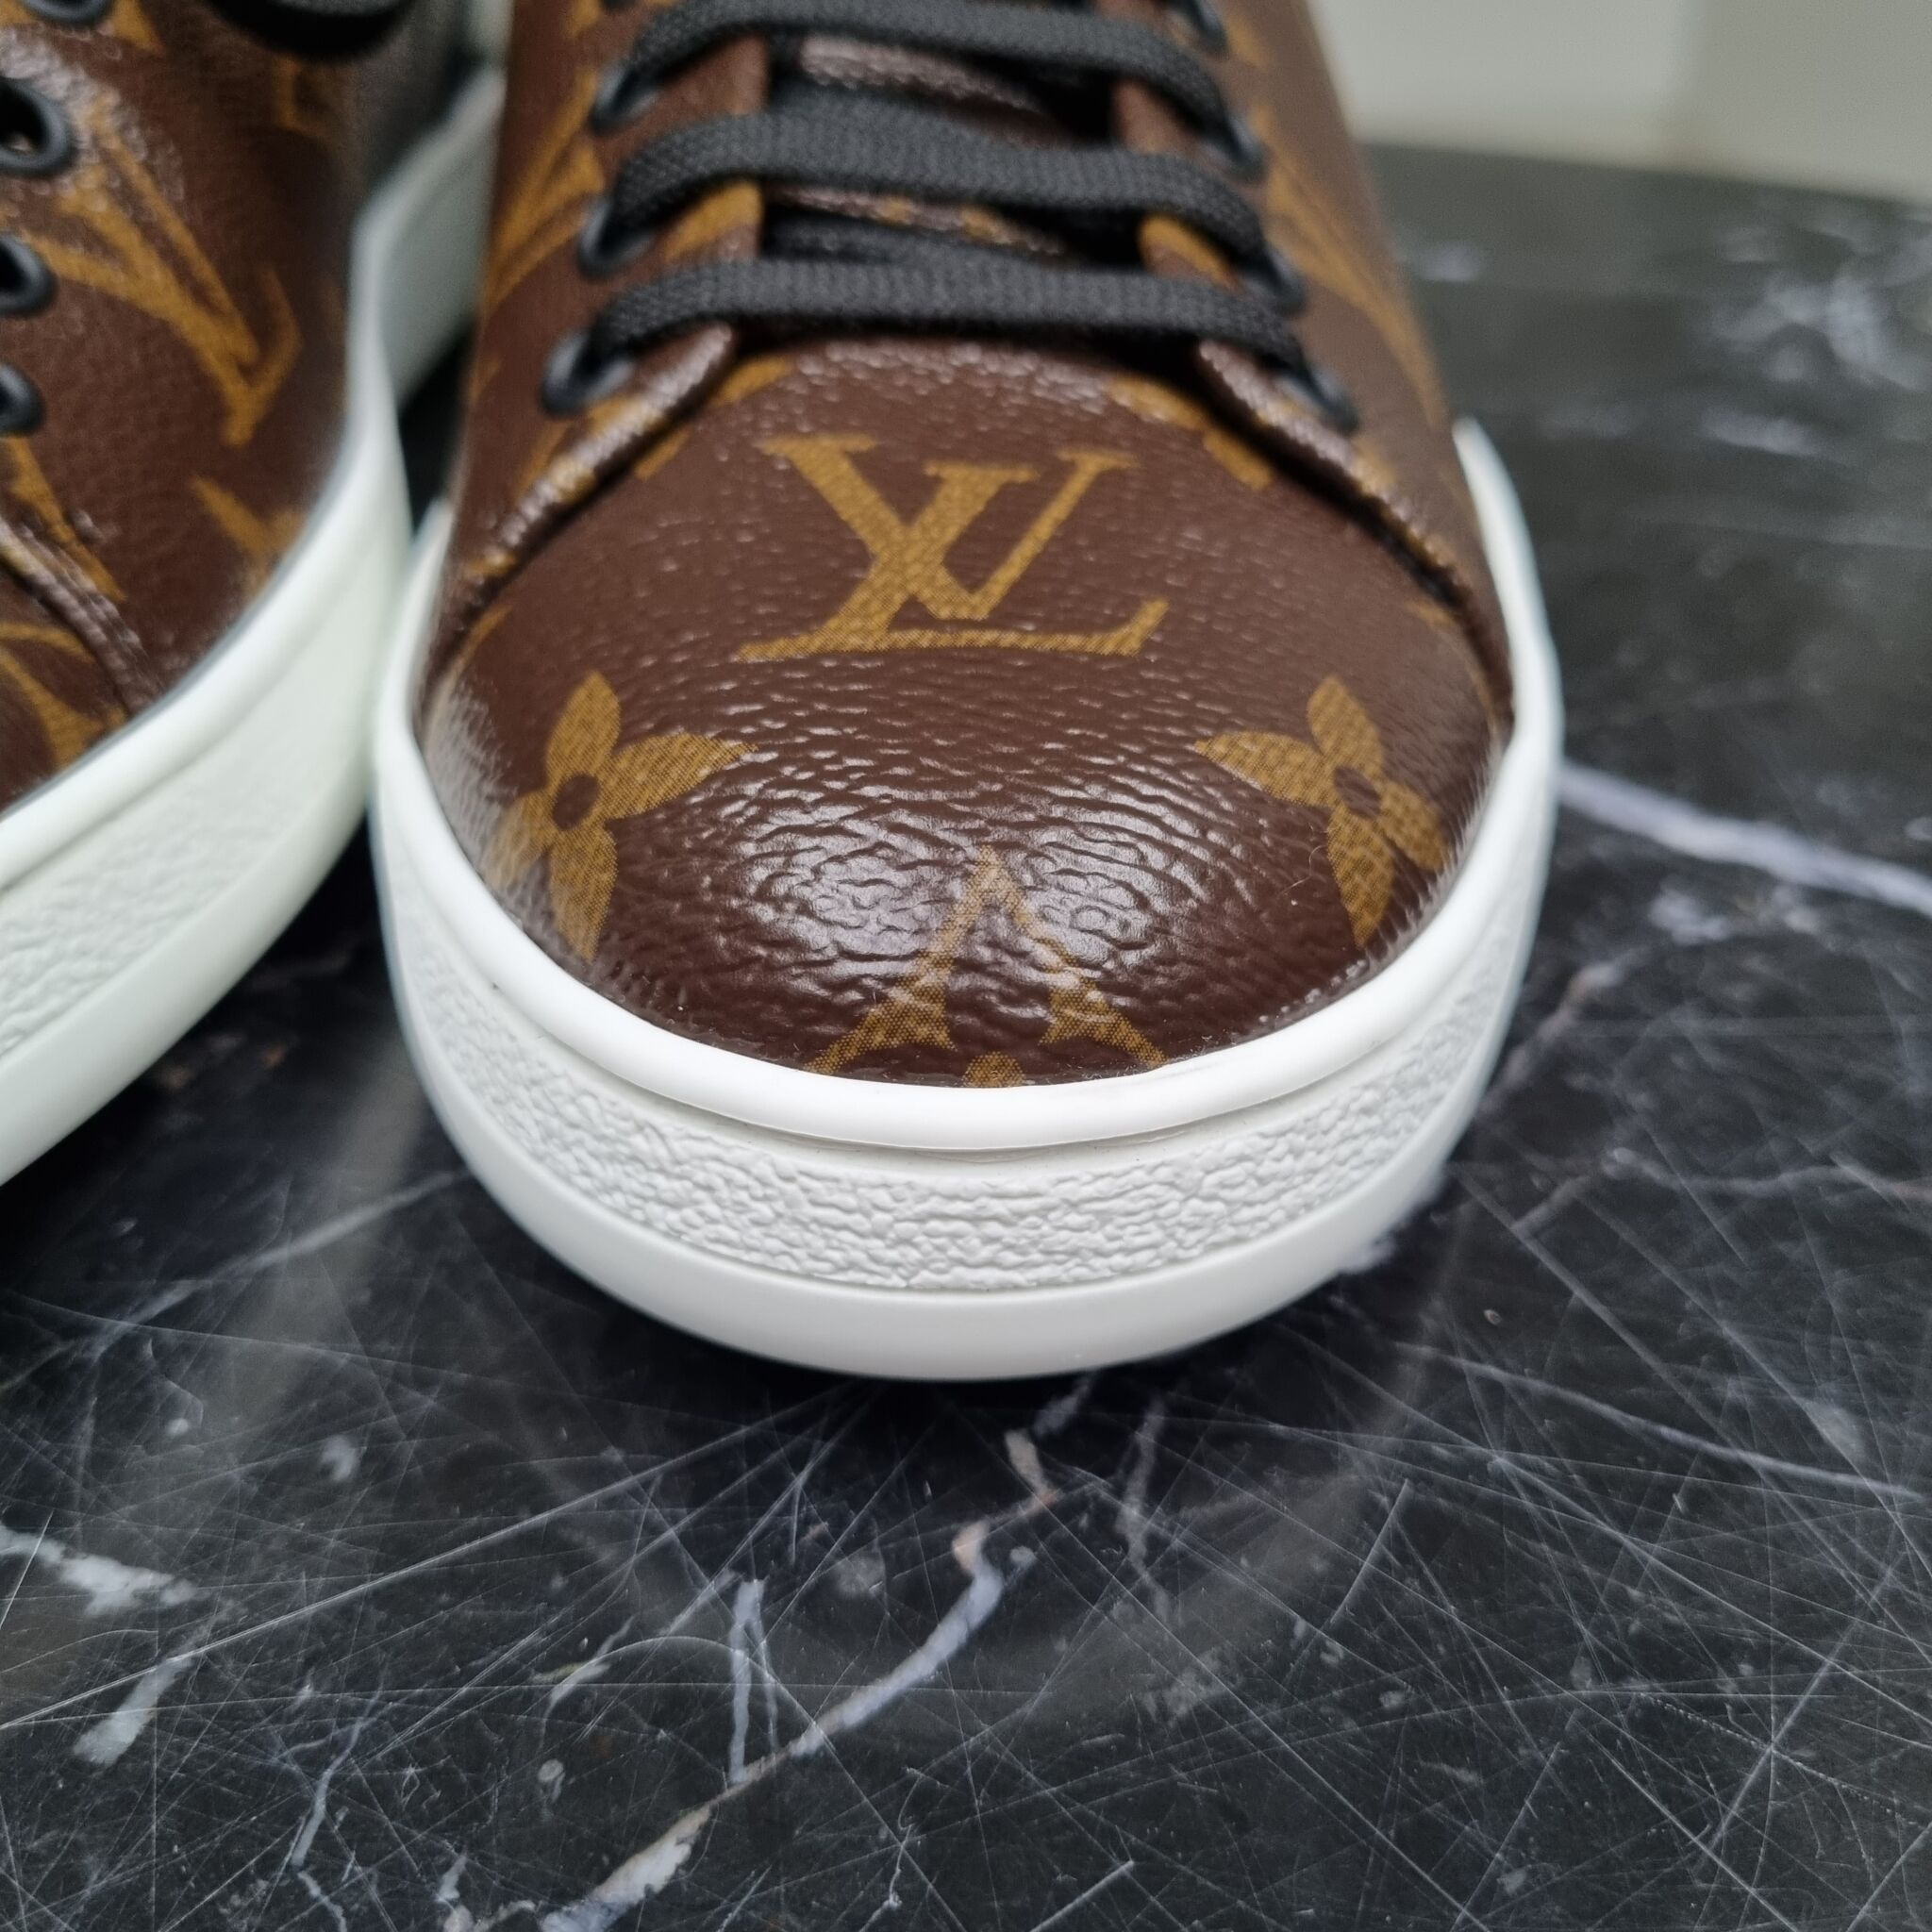 Louis Vuitton Low Top Front Row Sneakers White/Gold 36